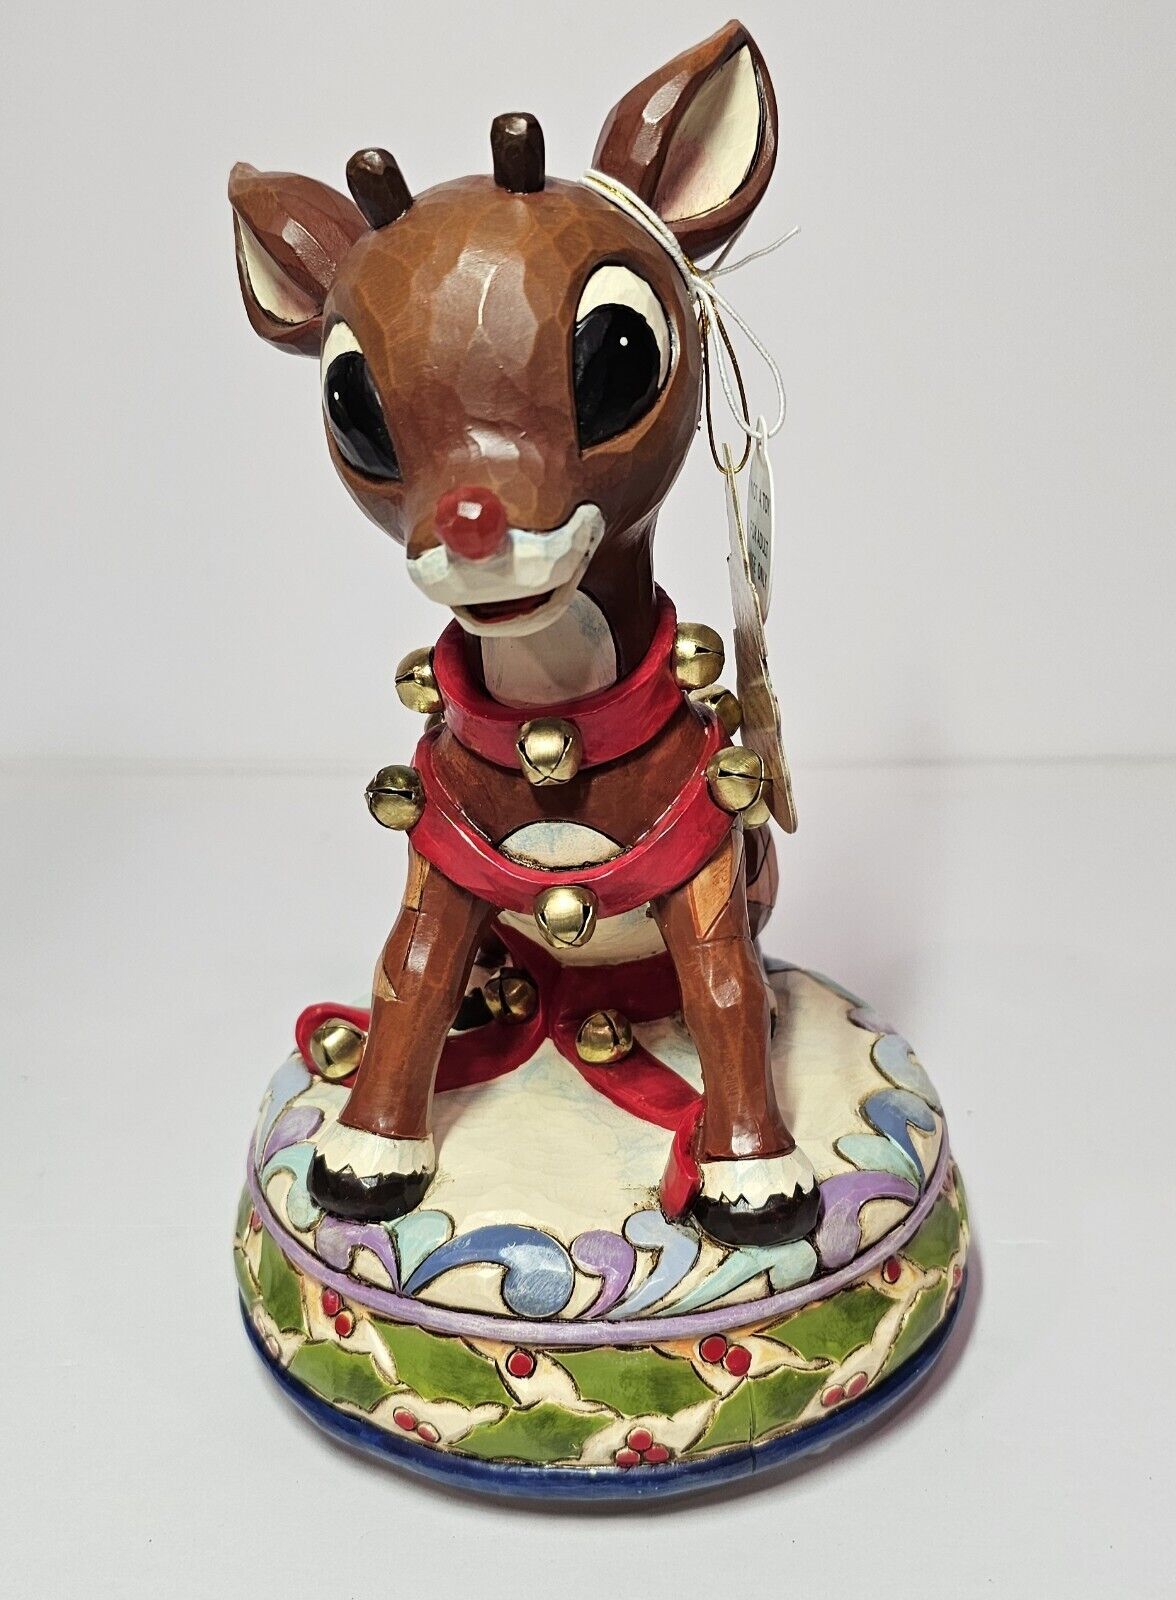 Rudolph The Red Nosed Reindeer Traditions Musical Figurine Jim Shore Enesco 2009